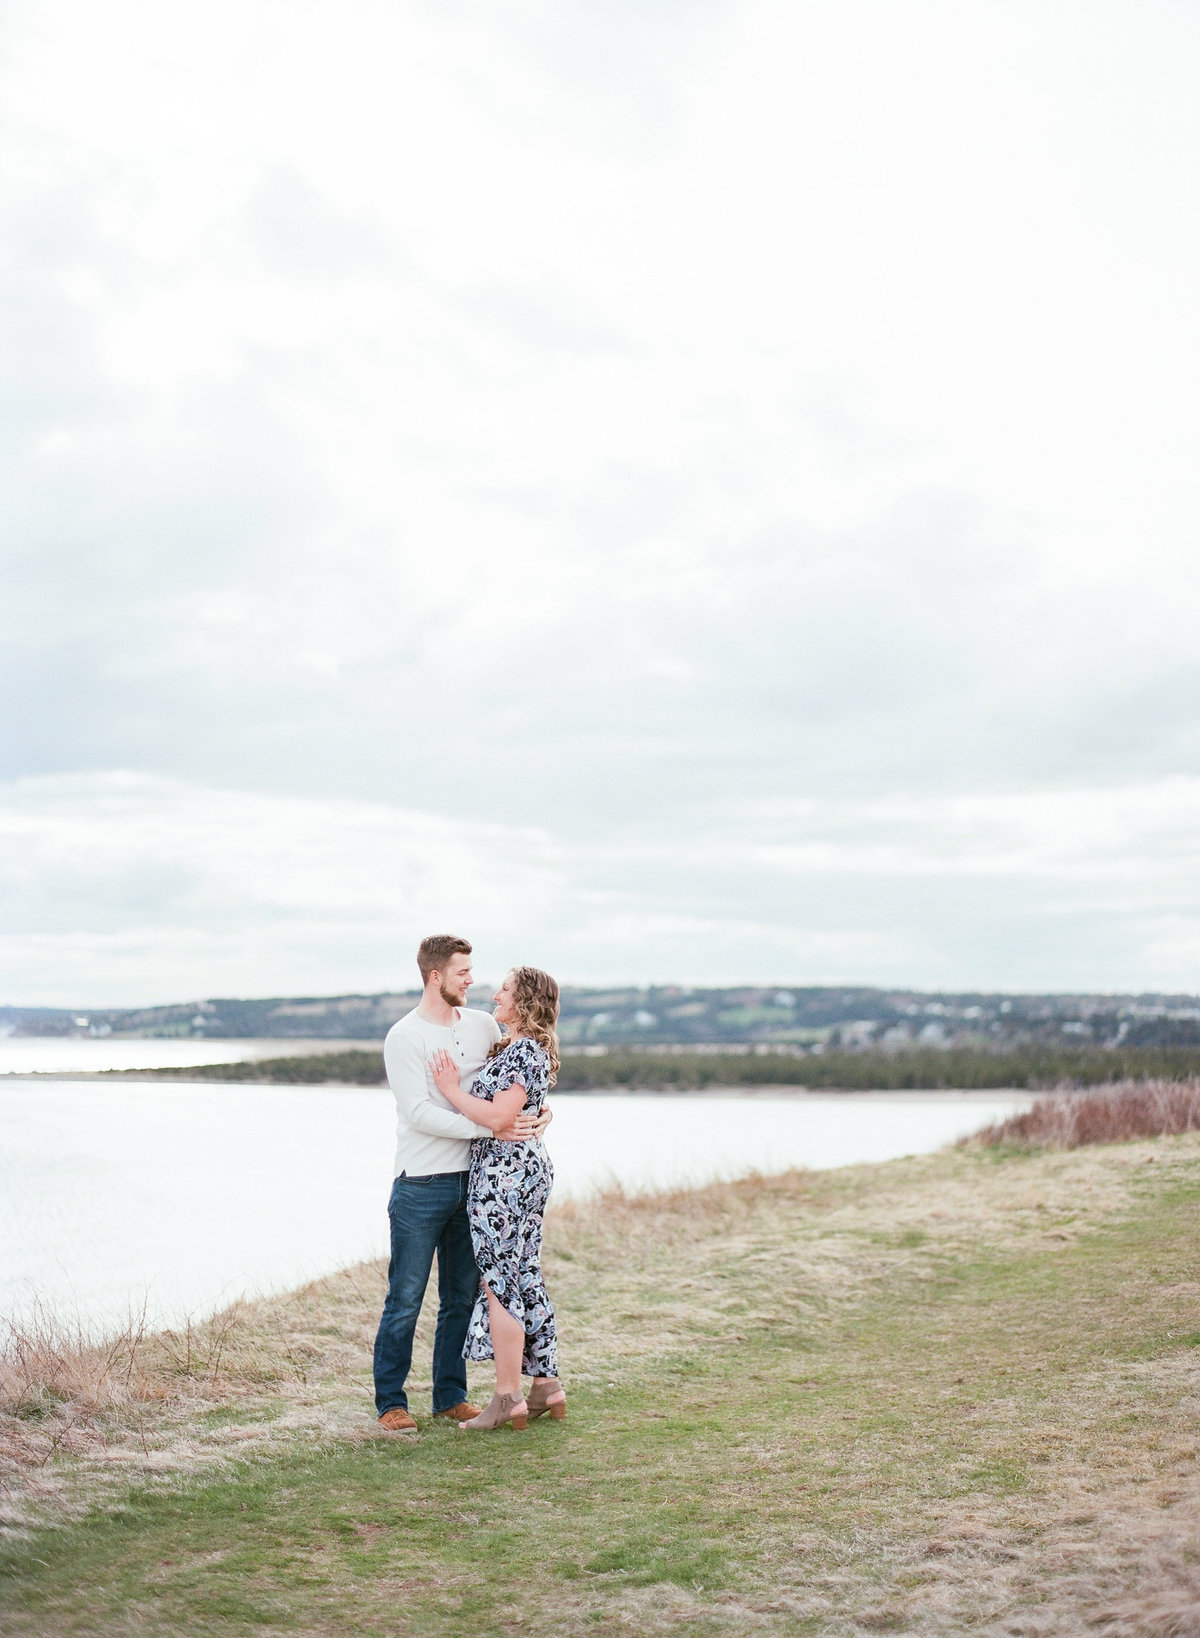 Jacqueline Anne Photography - Akayla and Andrew - Lawrencetown Beach-50